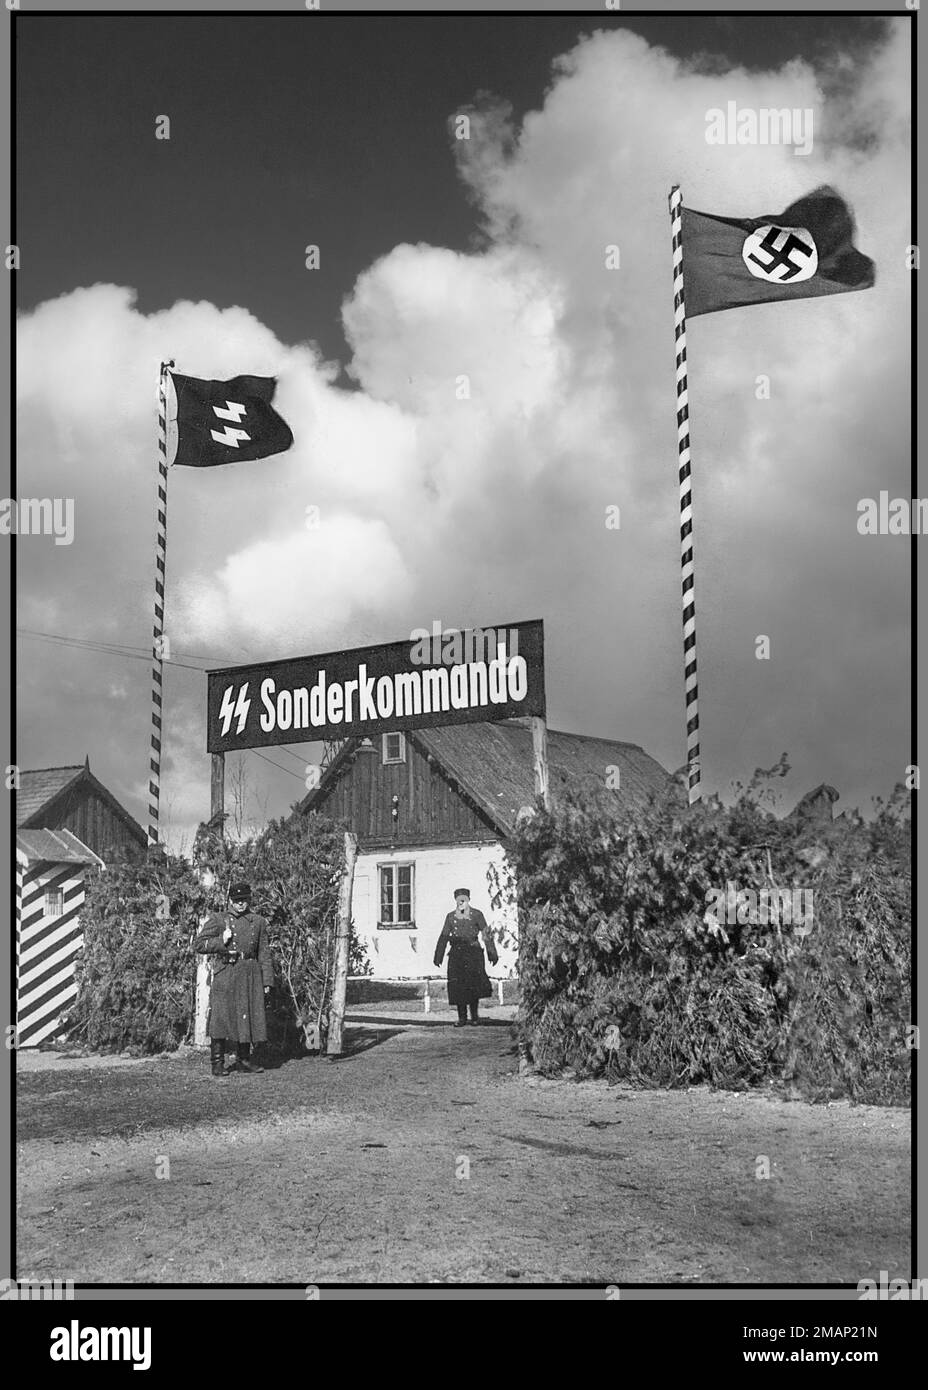 SOBIBOR EXTERMINATION CAMP ENTRANCE SONDERKOMMANDO  1942-43  Entrance gate at the Nazi death camp Sobibor in Nazi German-occupied Poland. Nazi Waffen SS and Swastika flags flying overhead. Sonderkommandos were work units made up of German Nazi death camp prisoners. They were composed of prisoners, usually Jews, who were forced, on threat of their own deaths, to aid with the disposal of gas chamber victims during the Holocaust. The death-camp Sonderkommandos, who were always inmates, were unrelated to the SS-Sonderkommandos, which were ad hoc units formed from members of various SS offices Stock Photo